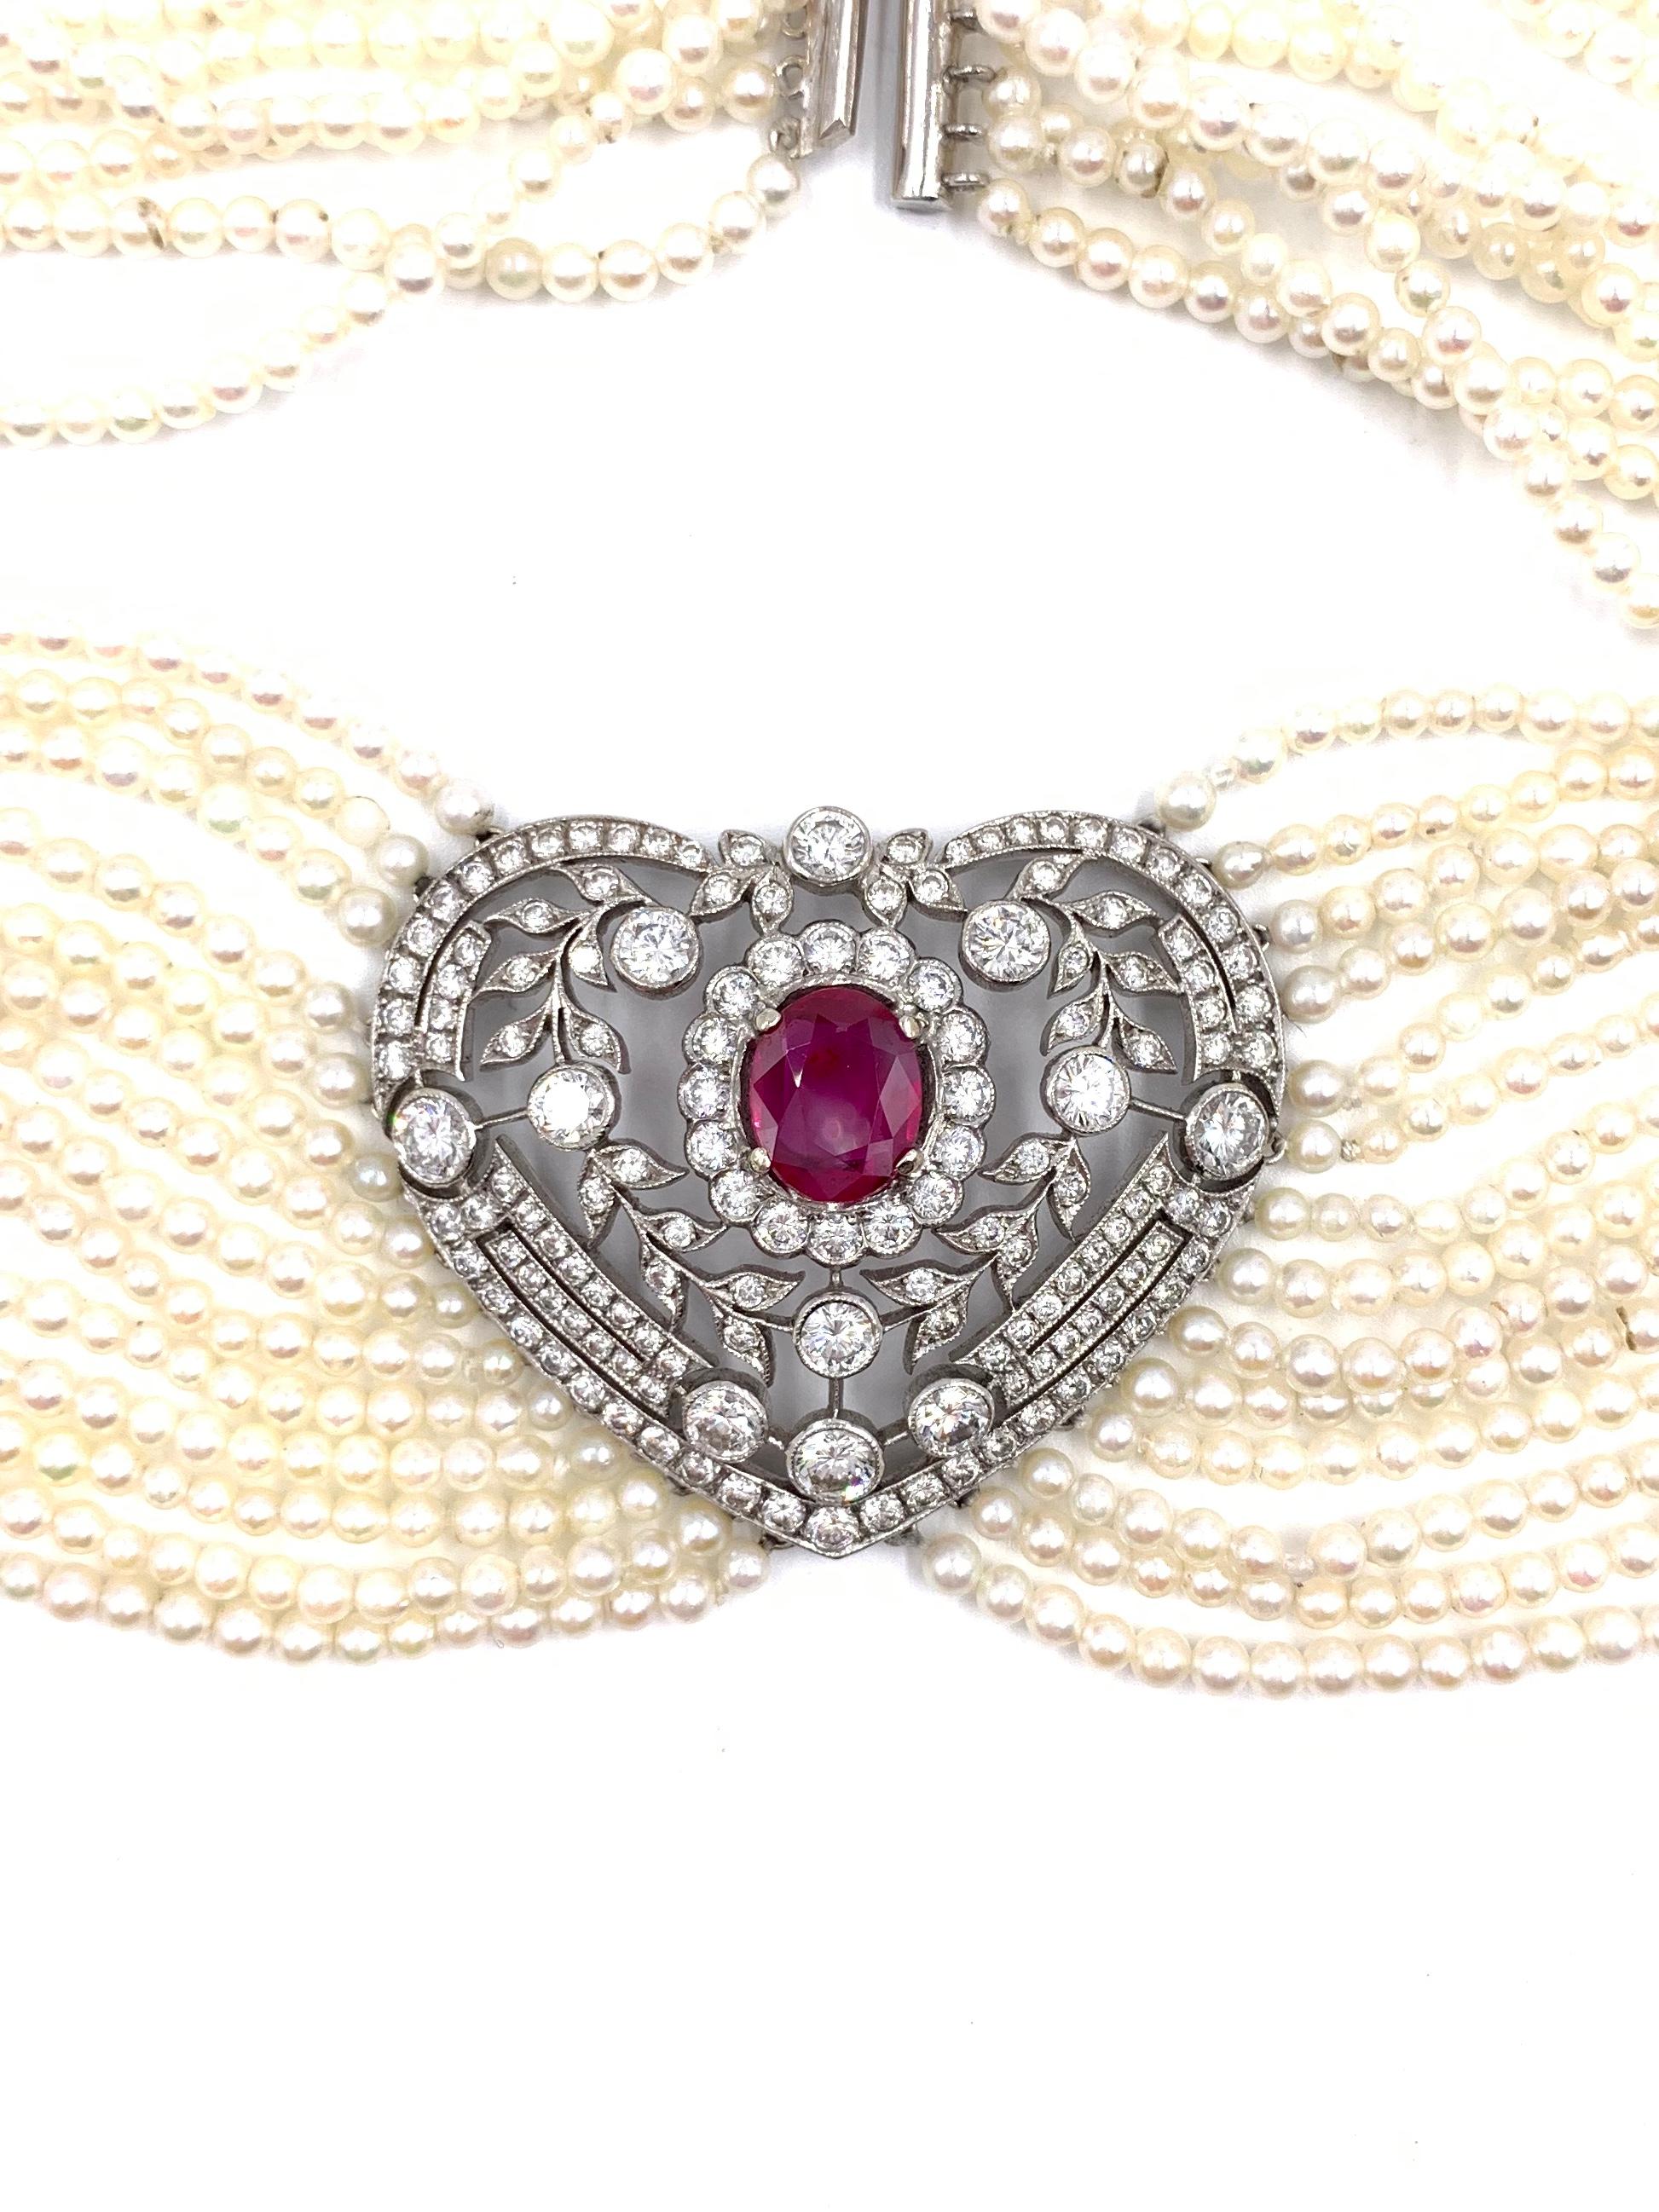 An exquisite and highly saturated approximate 2 carat oval red ruby is the centerpiece of this 14k white gold filigree and diamond heart shape pendant stationed at the center of an elegant 14-strand Victorian-inspired choker style necklace. The